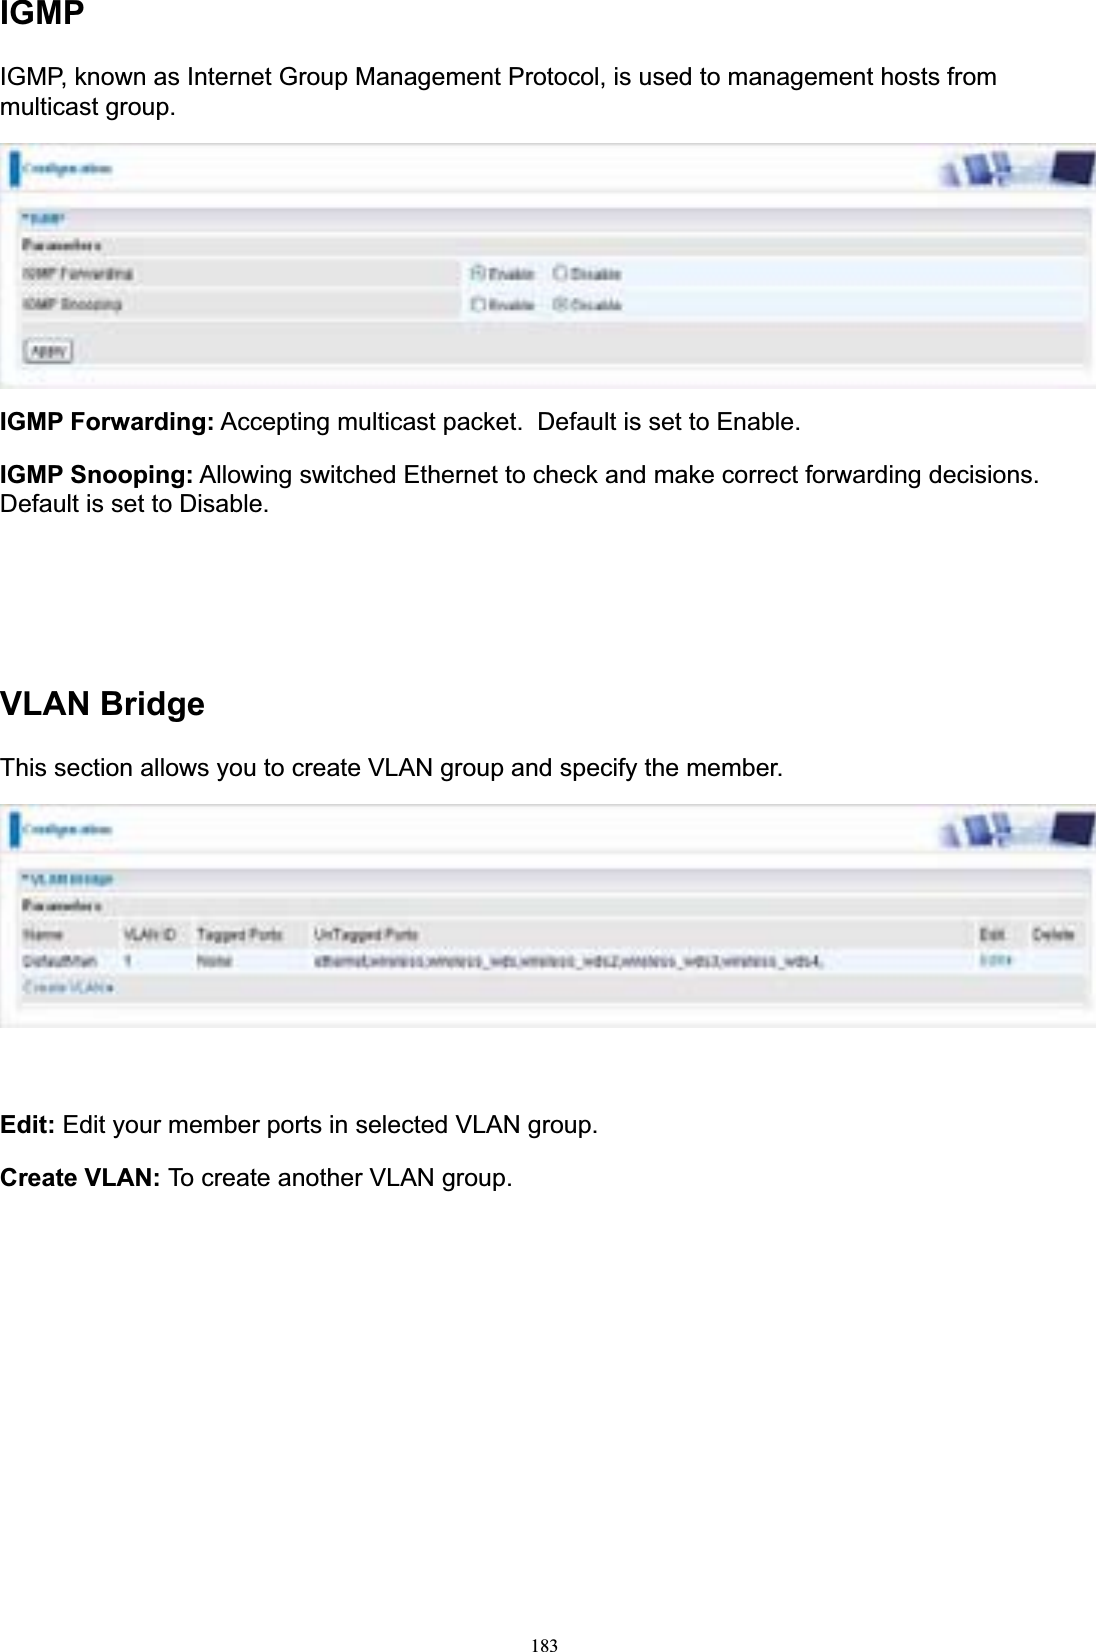 183IGMPIGMP, known as Internet Group Management Protocol, is used to management hosts from multicast group. IGMP Forwarding: Accepting multicast packet. Default is set to Enable. IGMP Snooping: Allowing switched Ethernet to check and make correct forwarding decisions. Default is set to Disable. VLAN BridgeThis section allows you to create VLAN group and specify the member. Edit: Edit your member ports in selected VLAN group. Create VLAN: To create another VLAN group. 